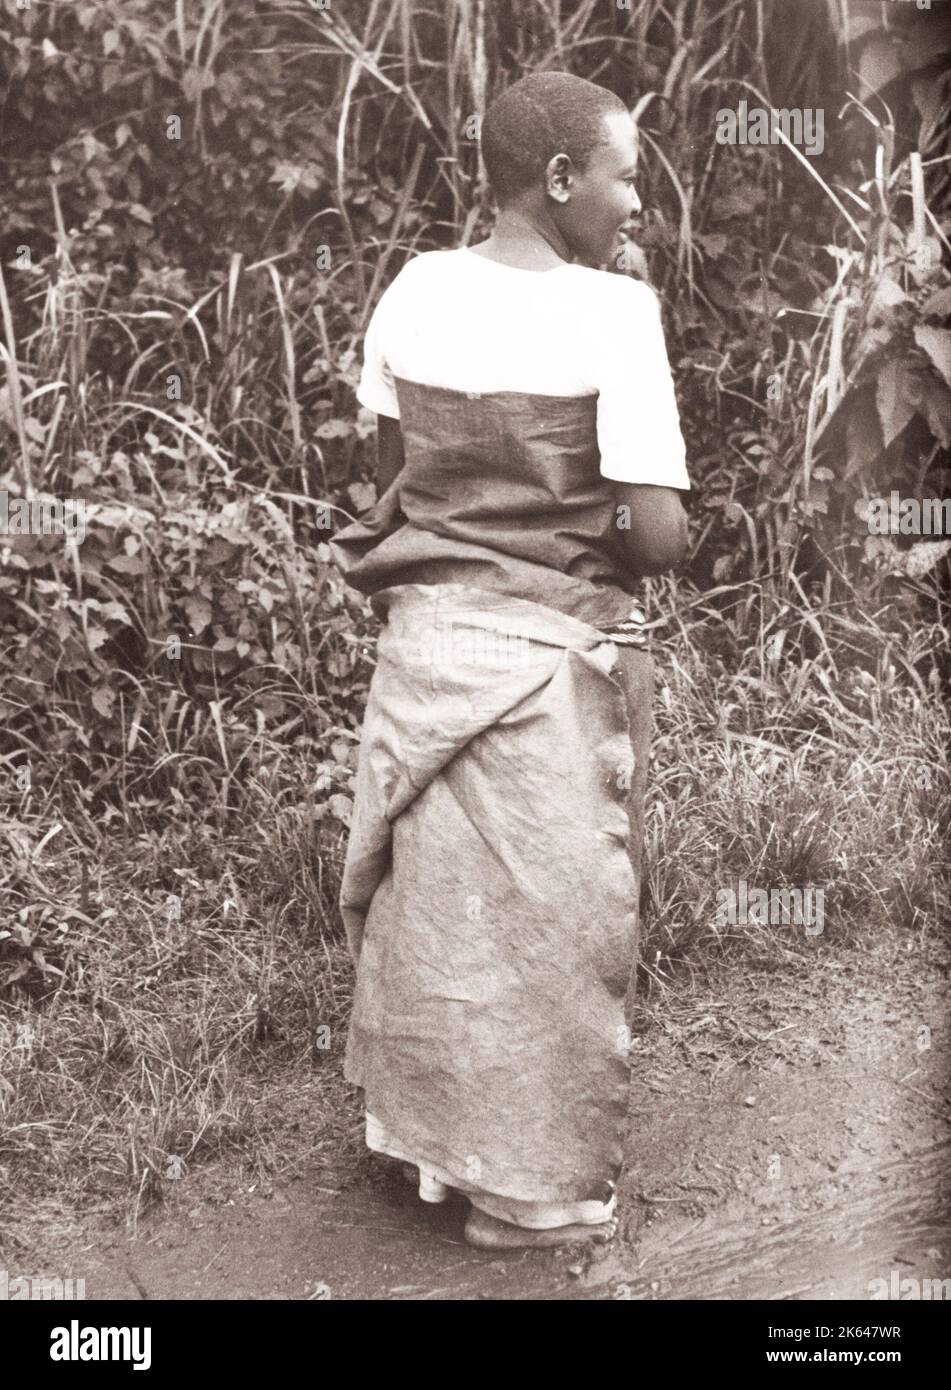 1940s East Africa - Uganda - Baganda woman in a traditional bark cloth or barkcloth dress Photograph by a British army recruitment officer stationed in East Africa and the Middle East during World War II Stock Photo